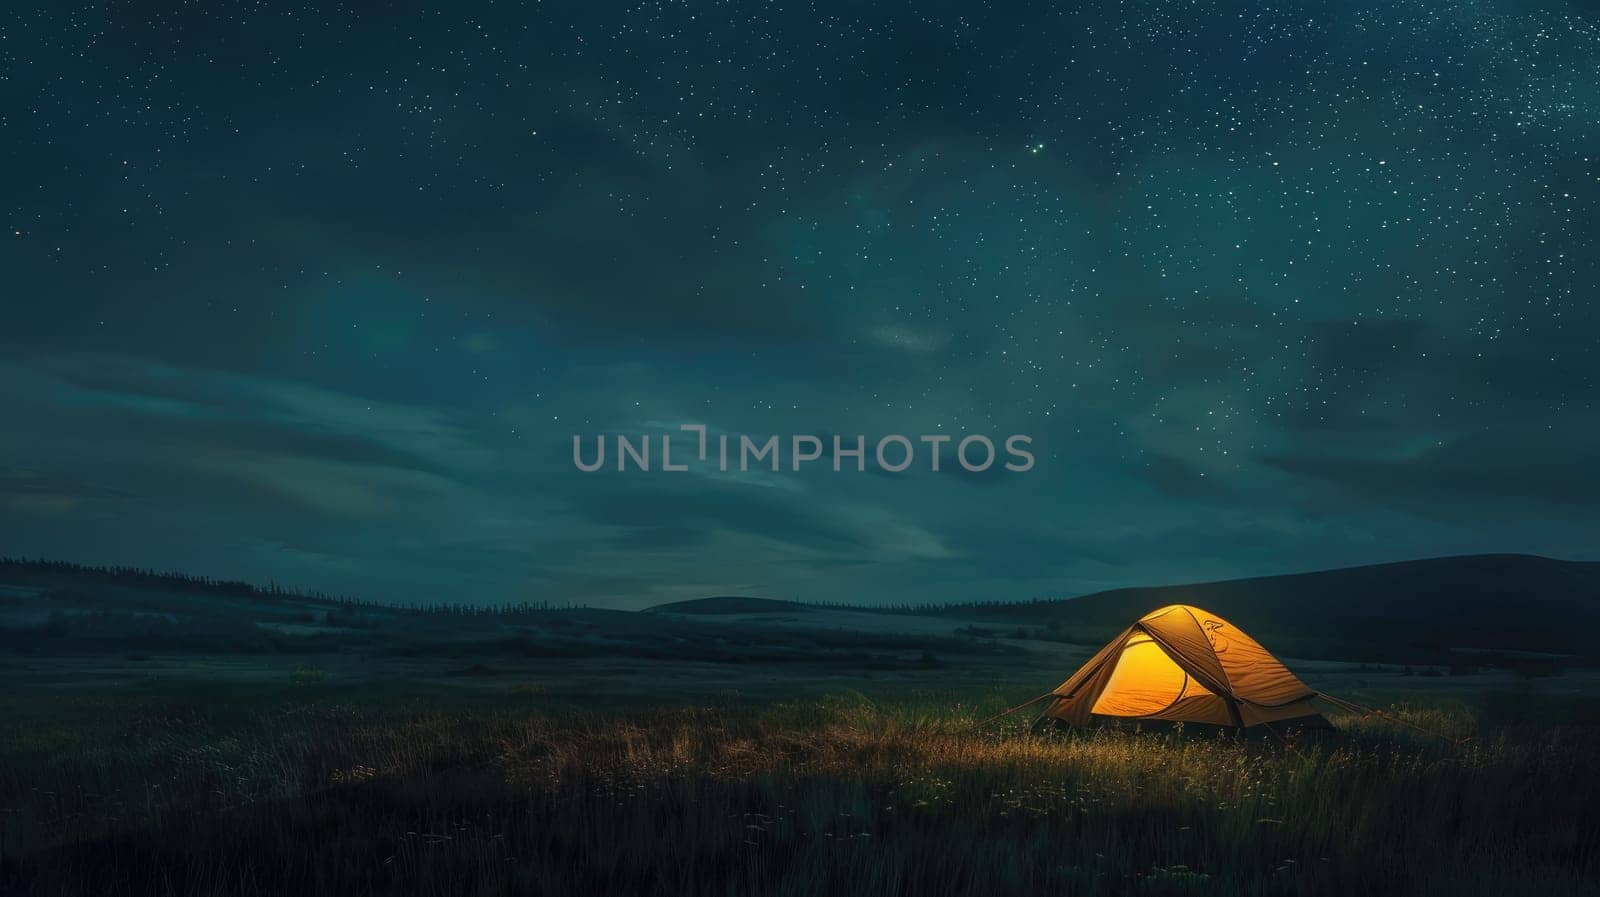 Tent is lit up on the field with a beautiful night sky and stars above.